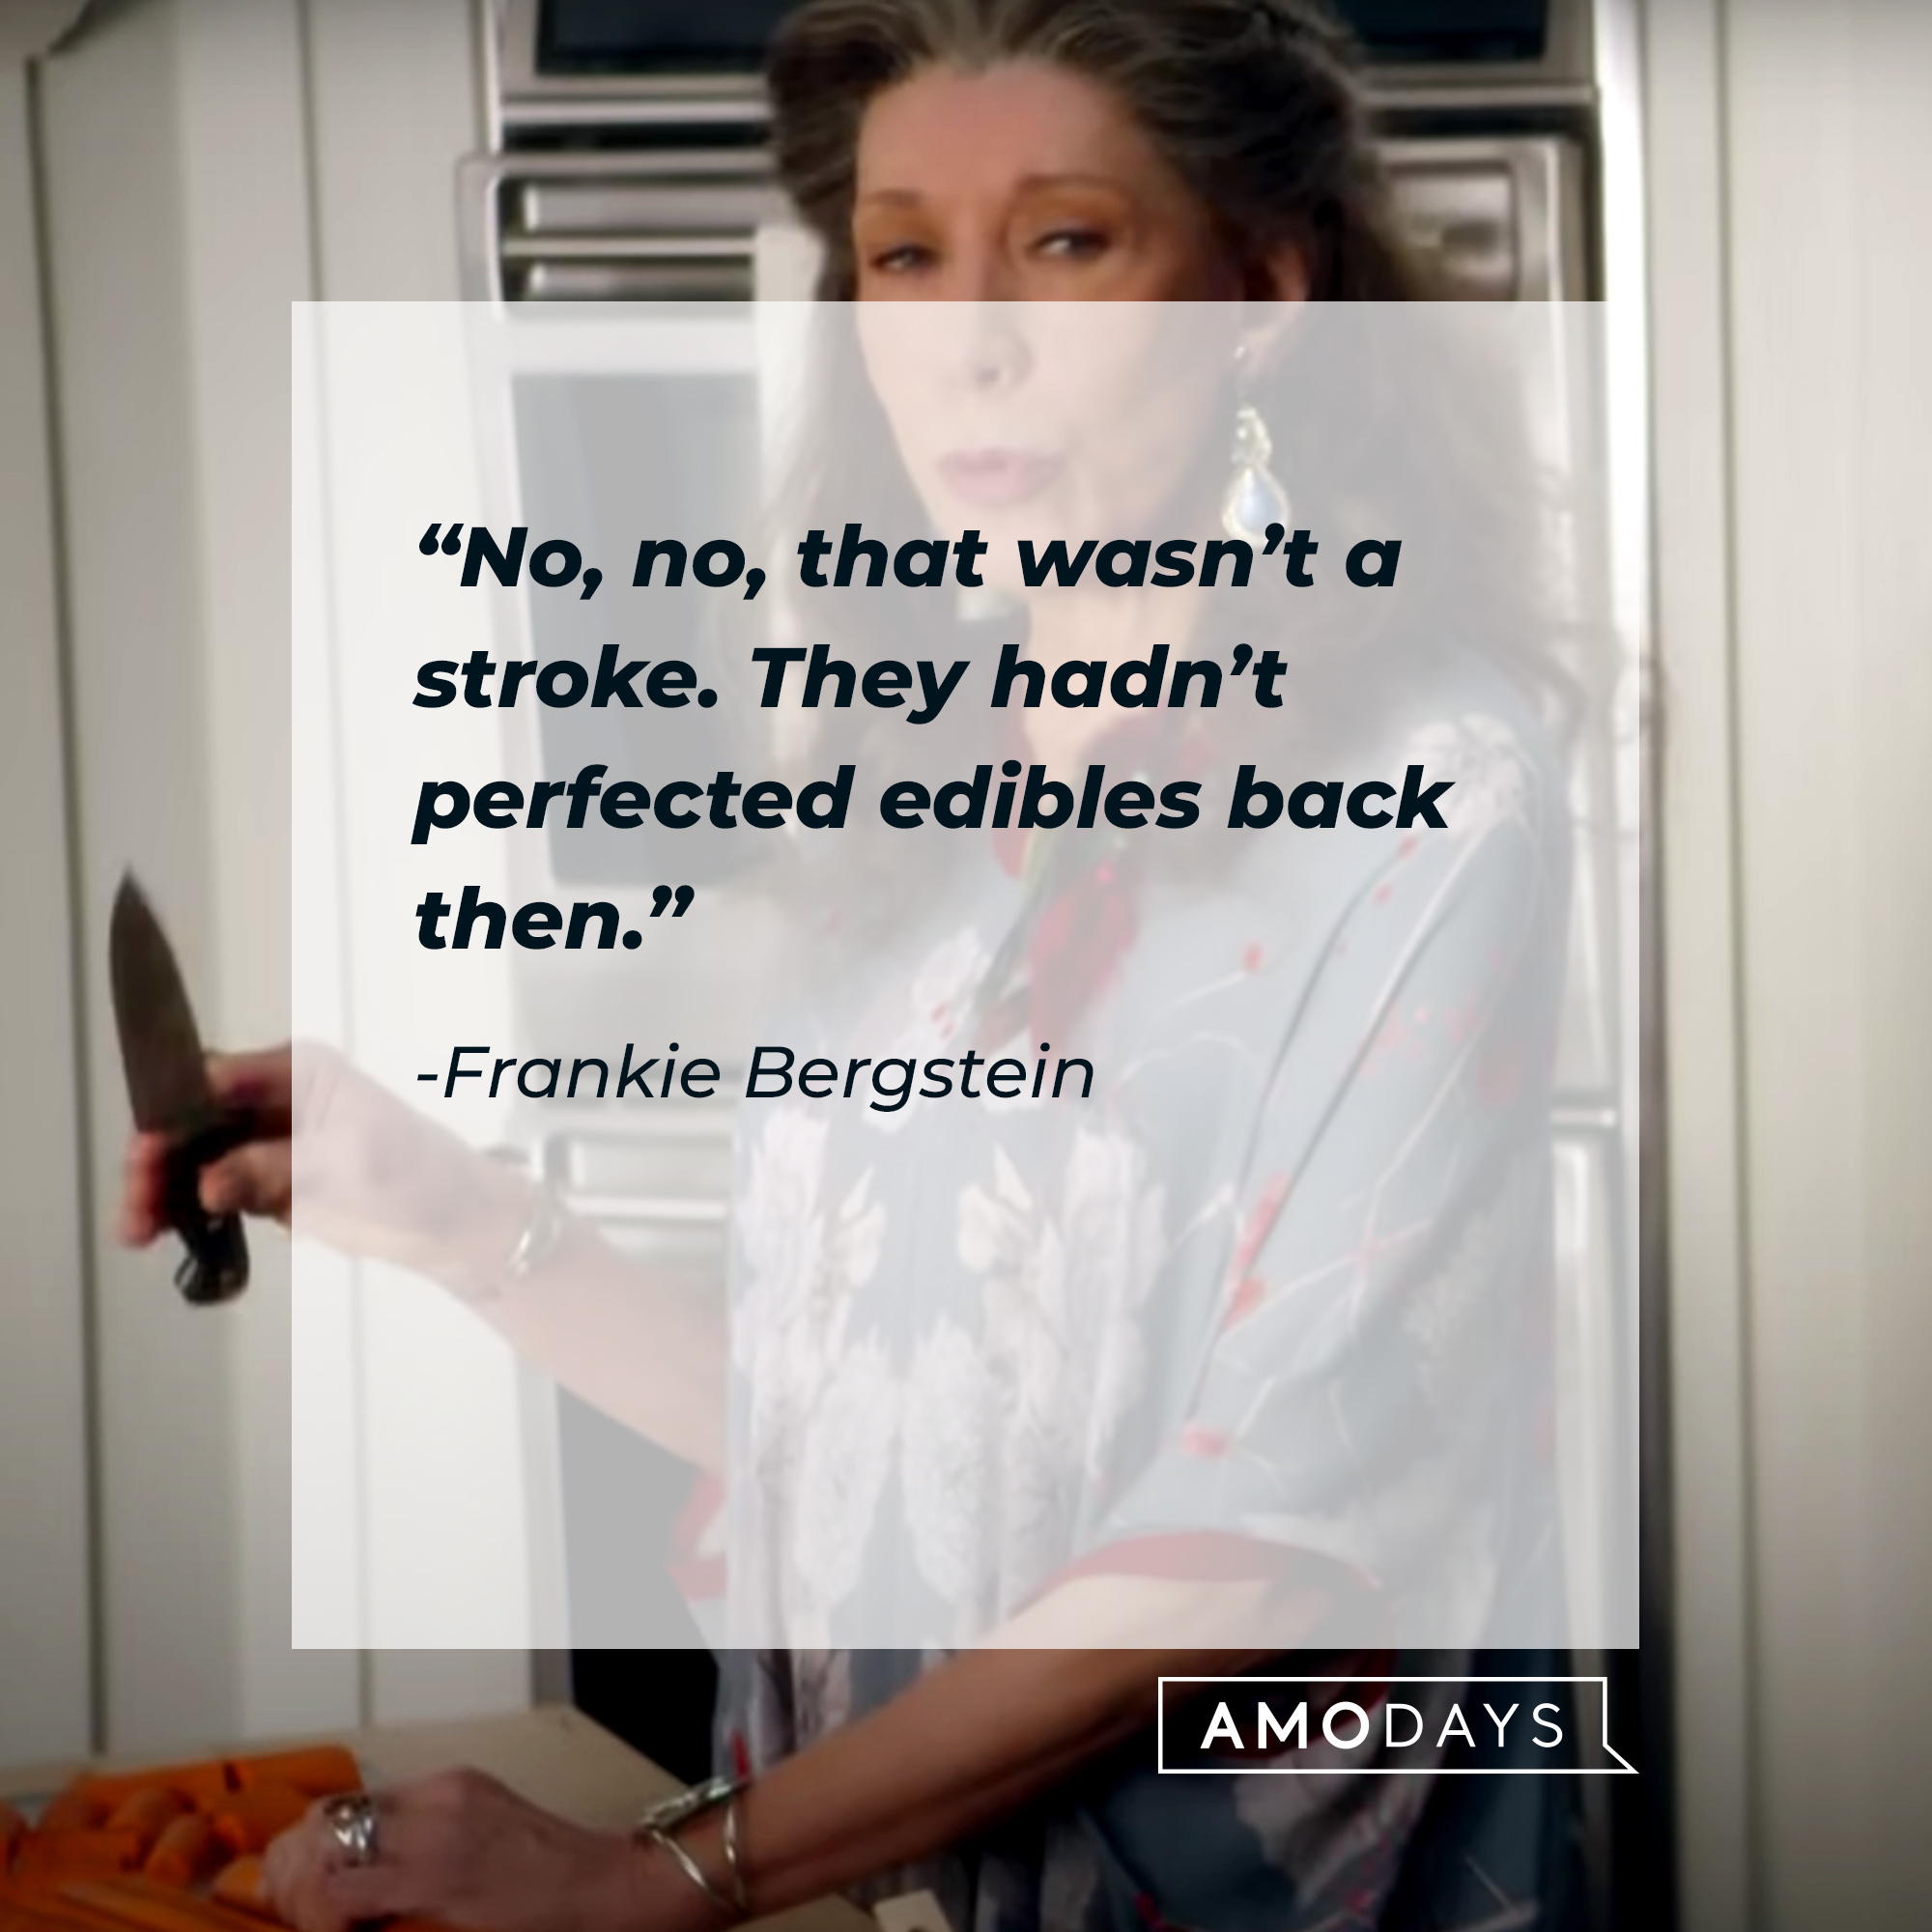 Frankie Bergstein's quote: “No, no, that wasn’t a stroke. They hadn’t perfected edibles back then.” | Source: youtube.com/Netflix